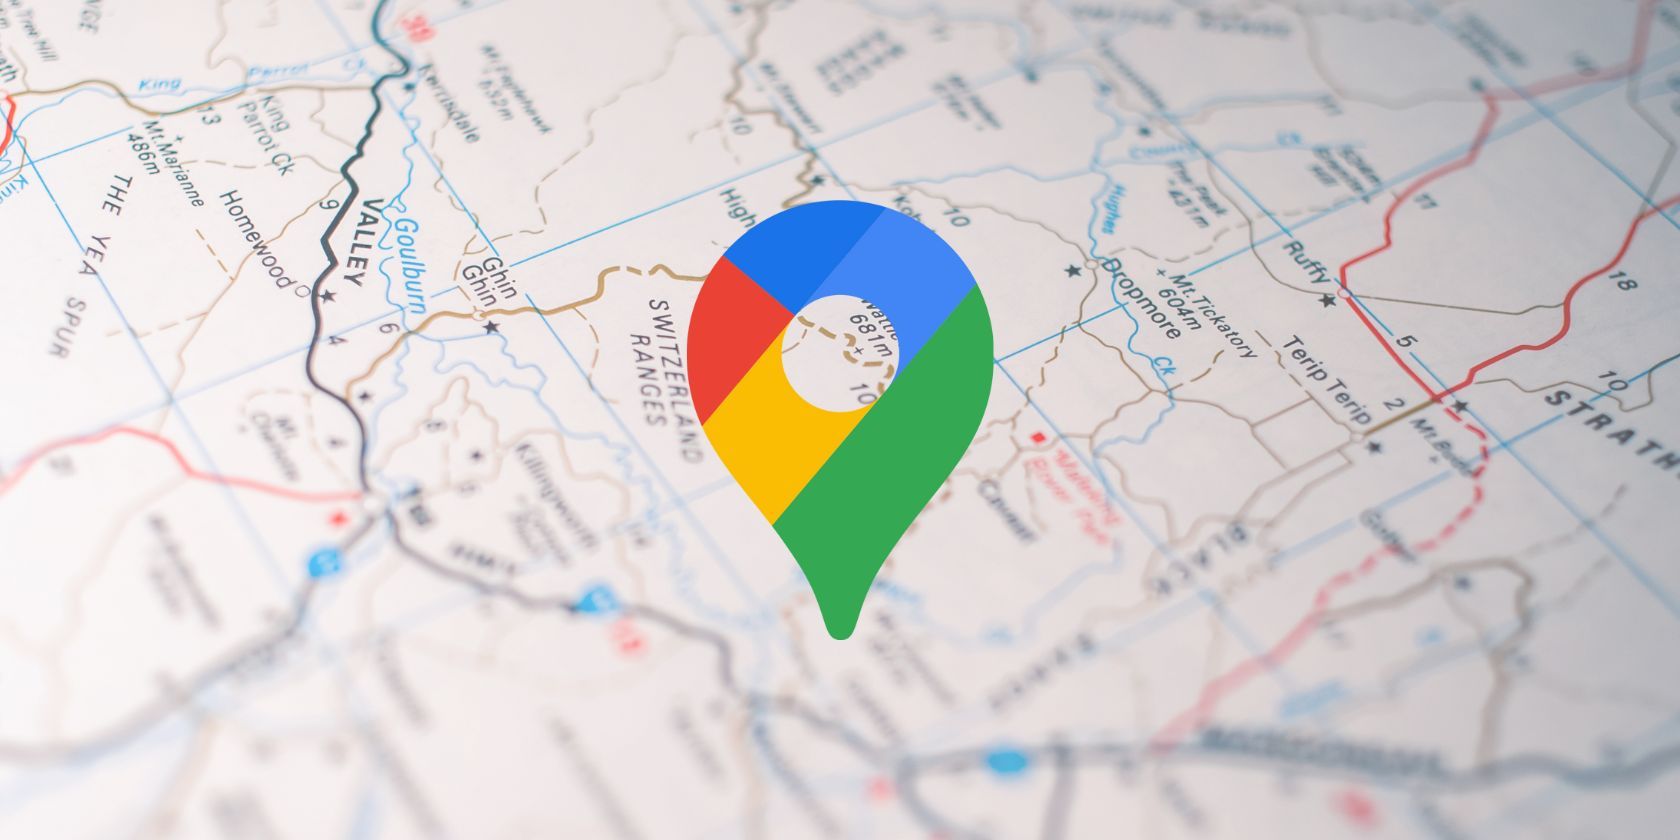 An image of the Google Maps Icon in the center with a map as the background